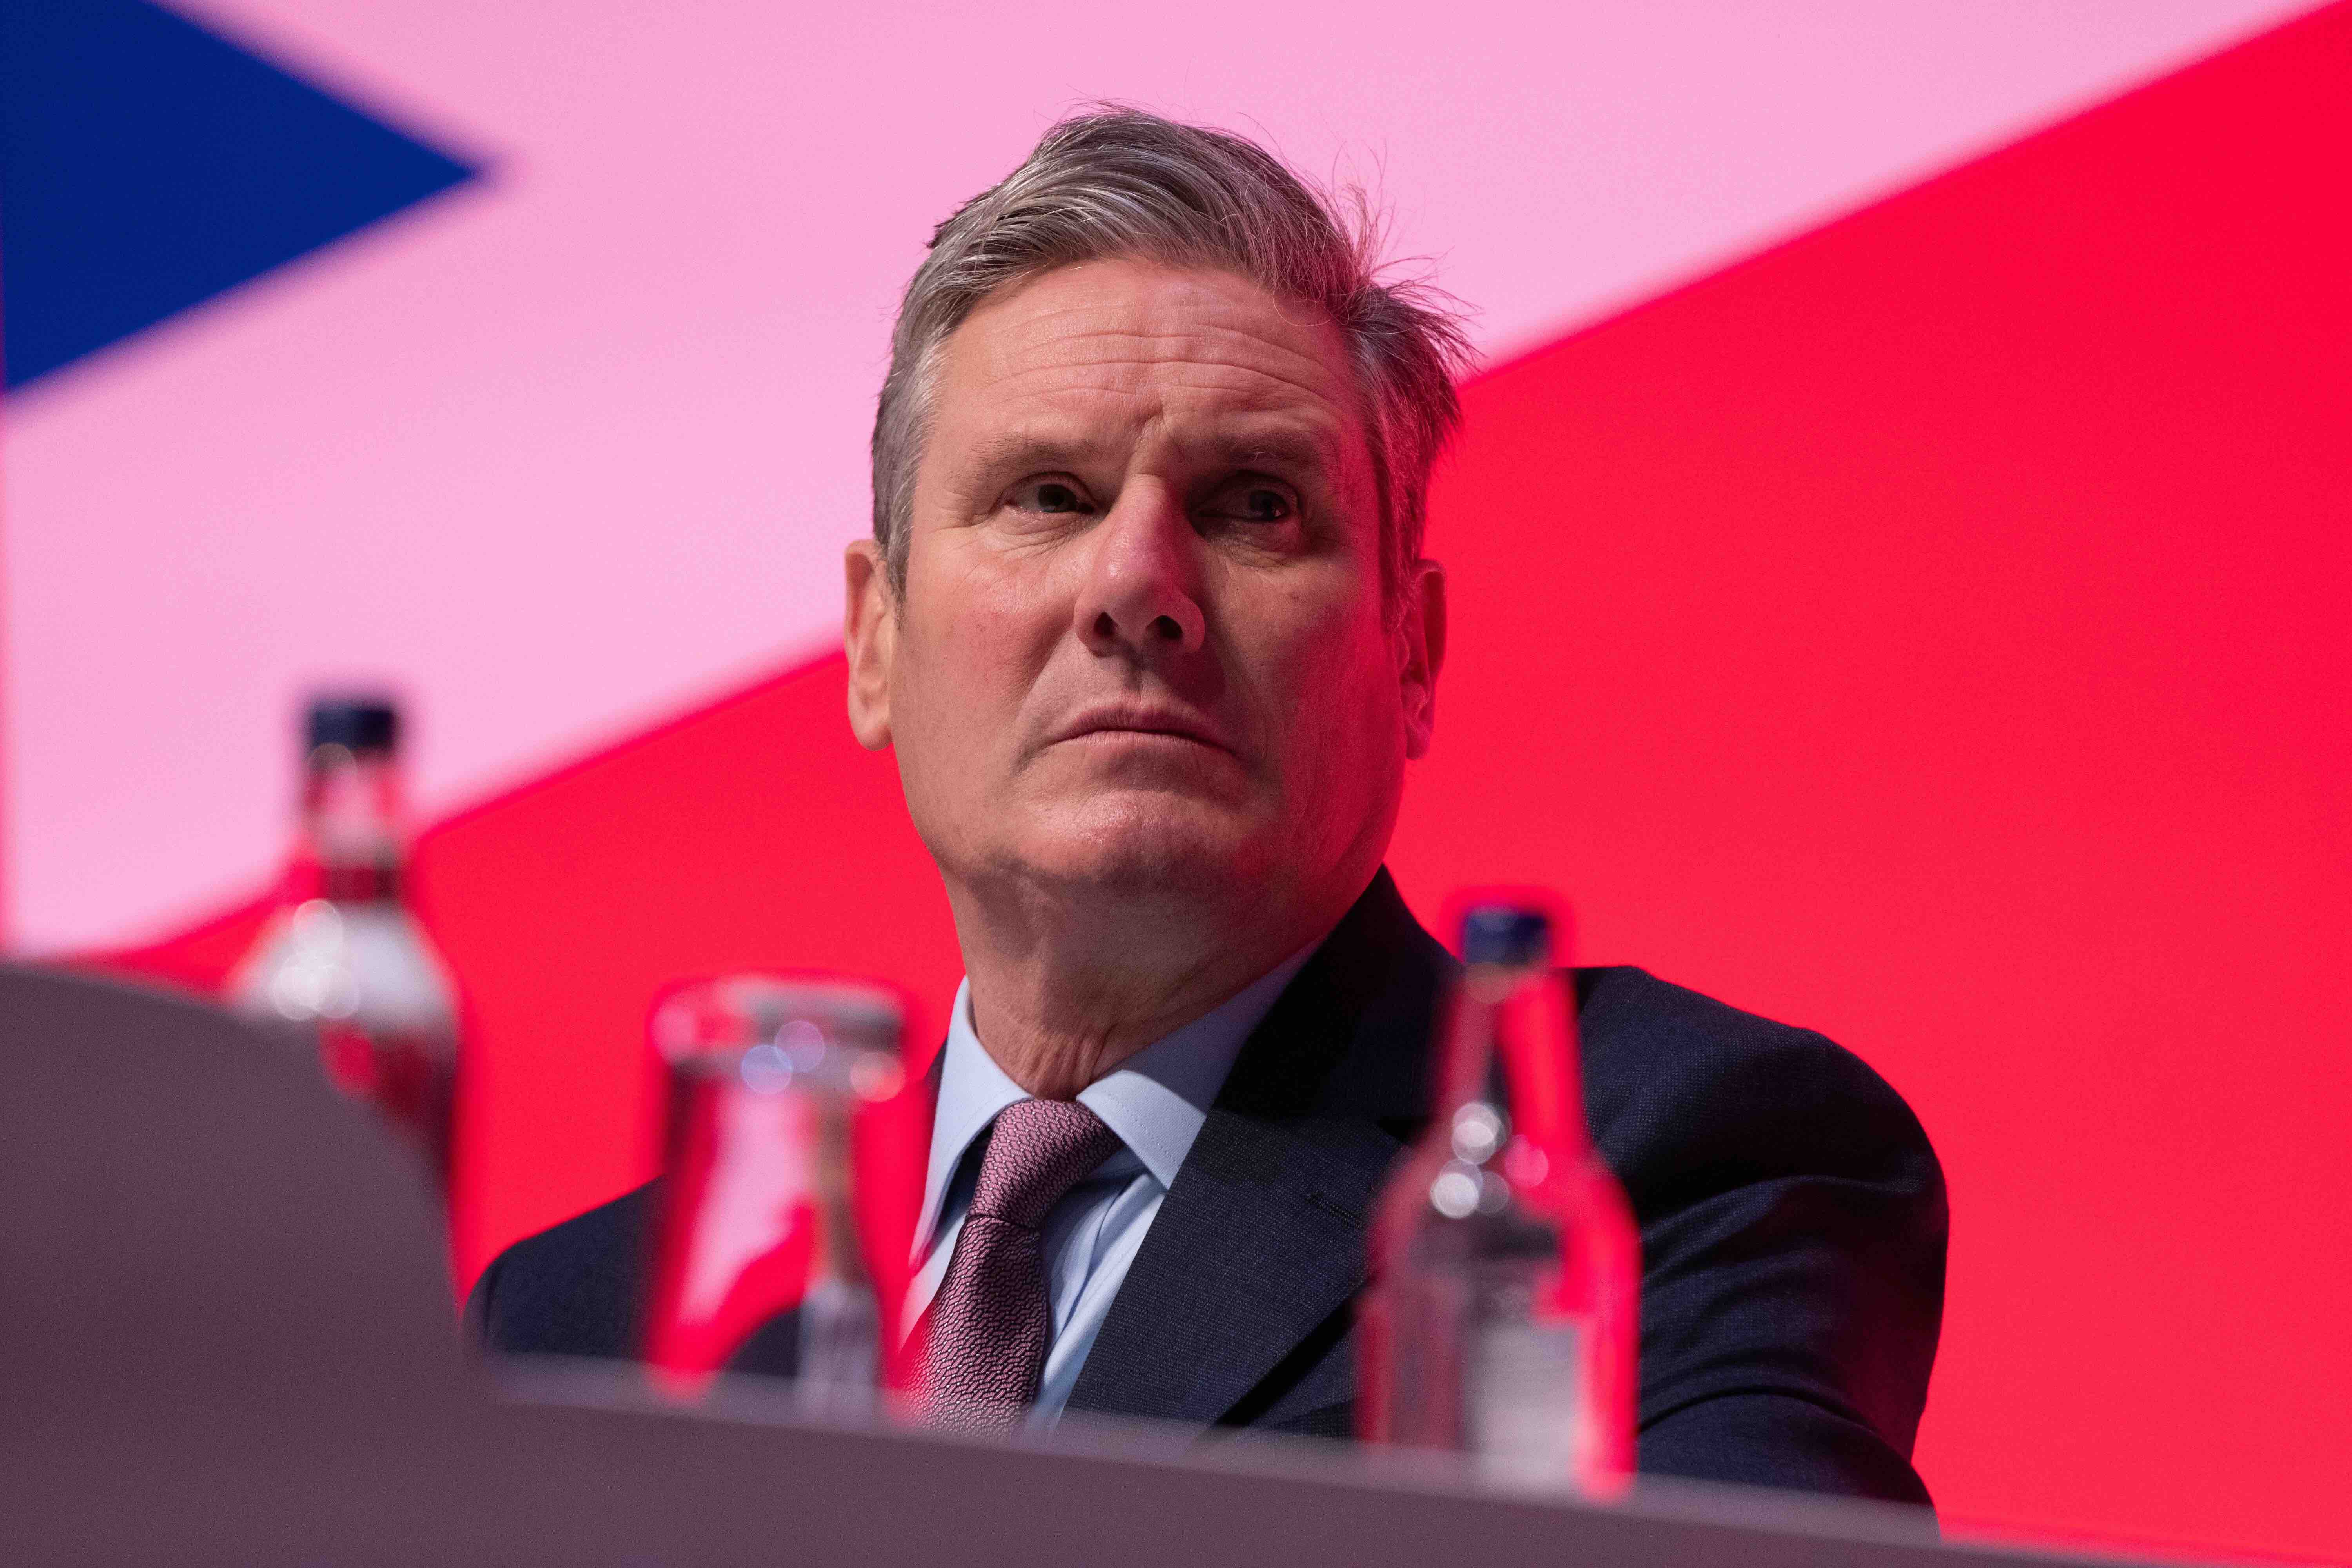 Analysis reveals high probability of Starmer’s audio on Rochdale to be deepfake